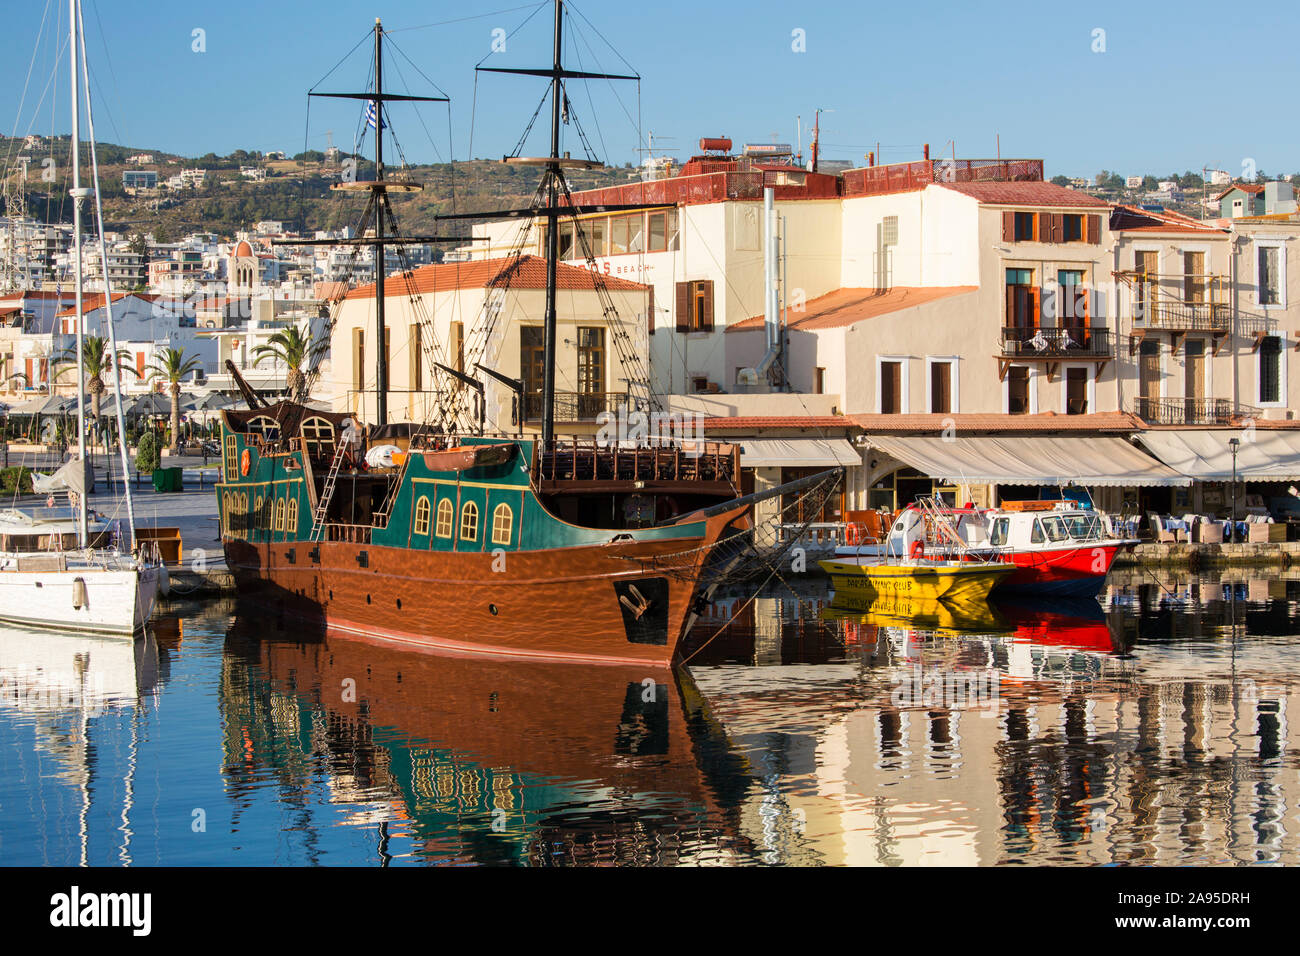 Rethymno, Crete, Greece. View across the Venetian Harbour, early morning, colourful boats reflected in still water. Stock Photo